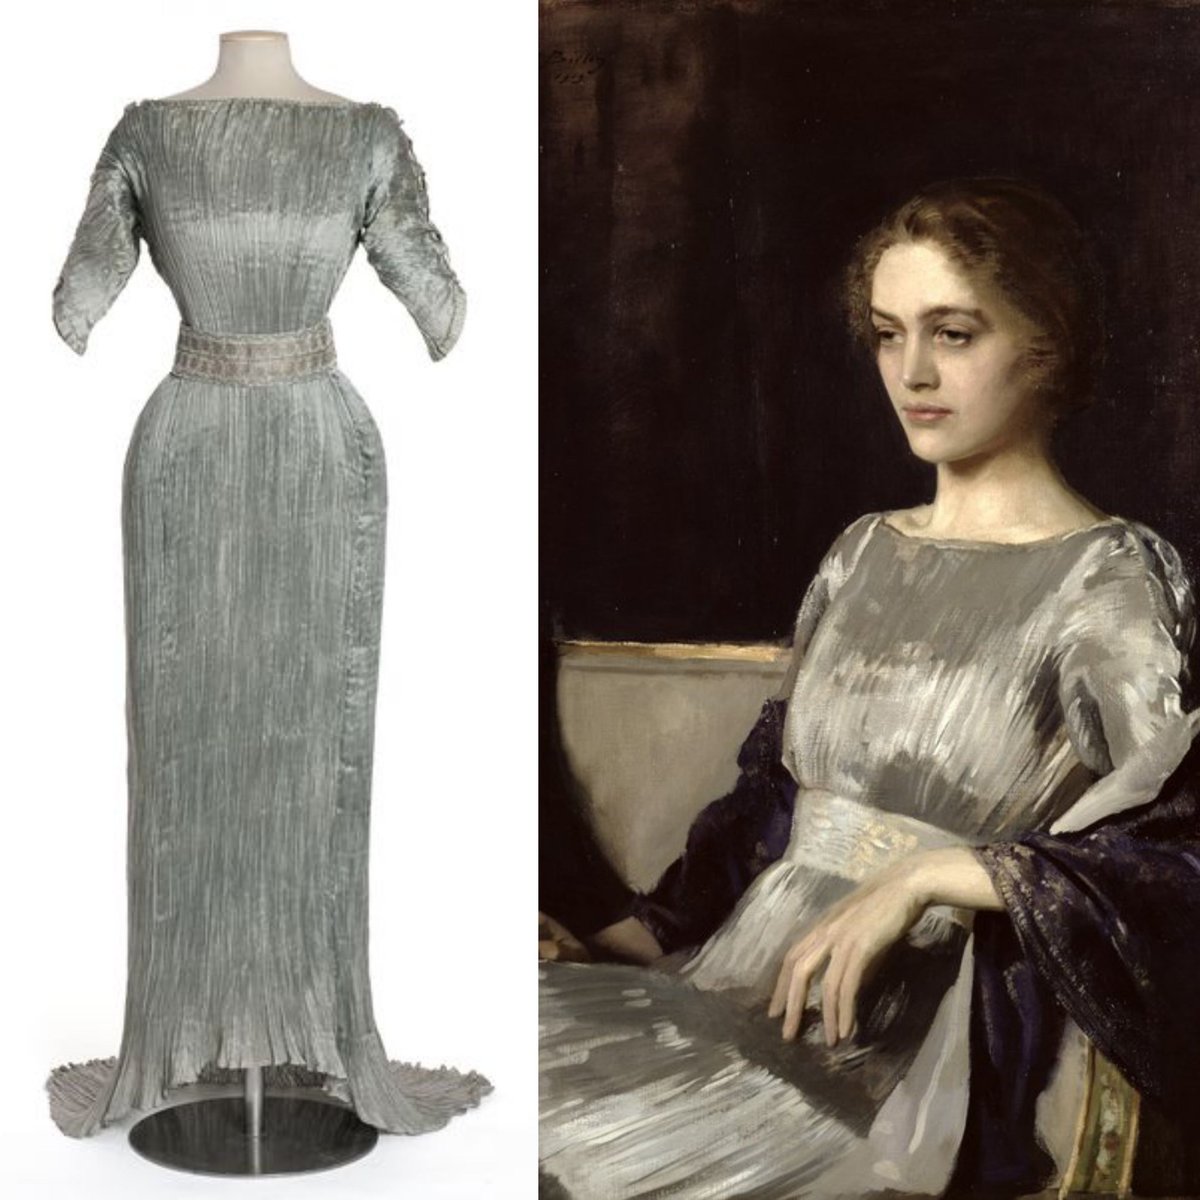 Spanish fashion designer Mariano Fortuny was born #OnThisDay in 1871. Miss Muriel Gore chose to be painted by Oswald Birley in 1919 wearing a silver Fortuny dress that is very similar in style to this satin Robe du soir from the collection of @madparisfr. #fashionhistory #dress